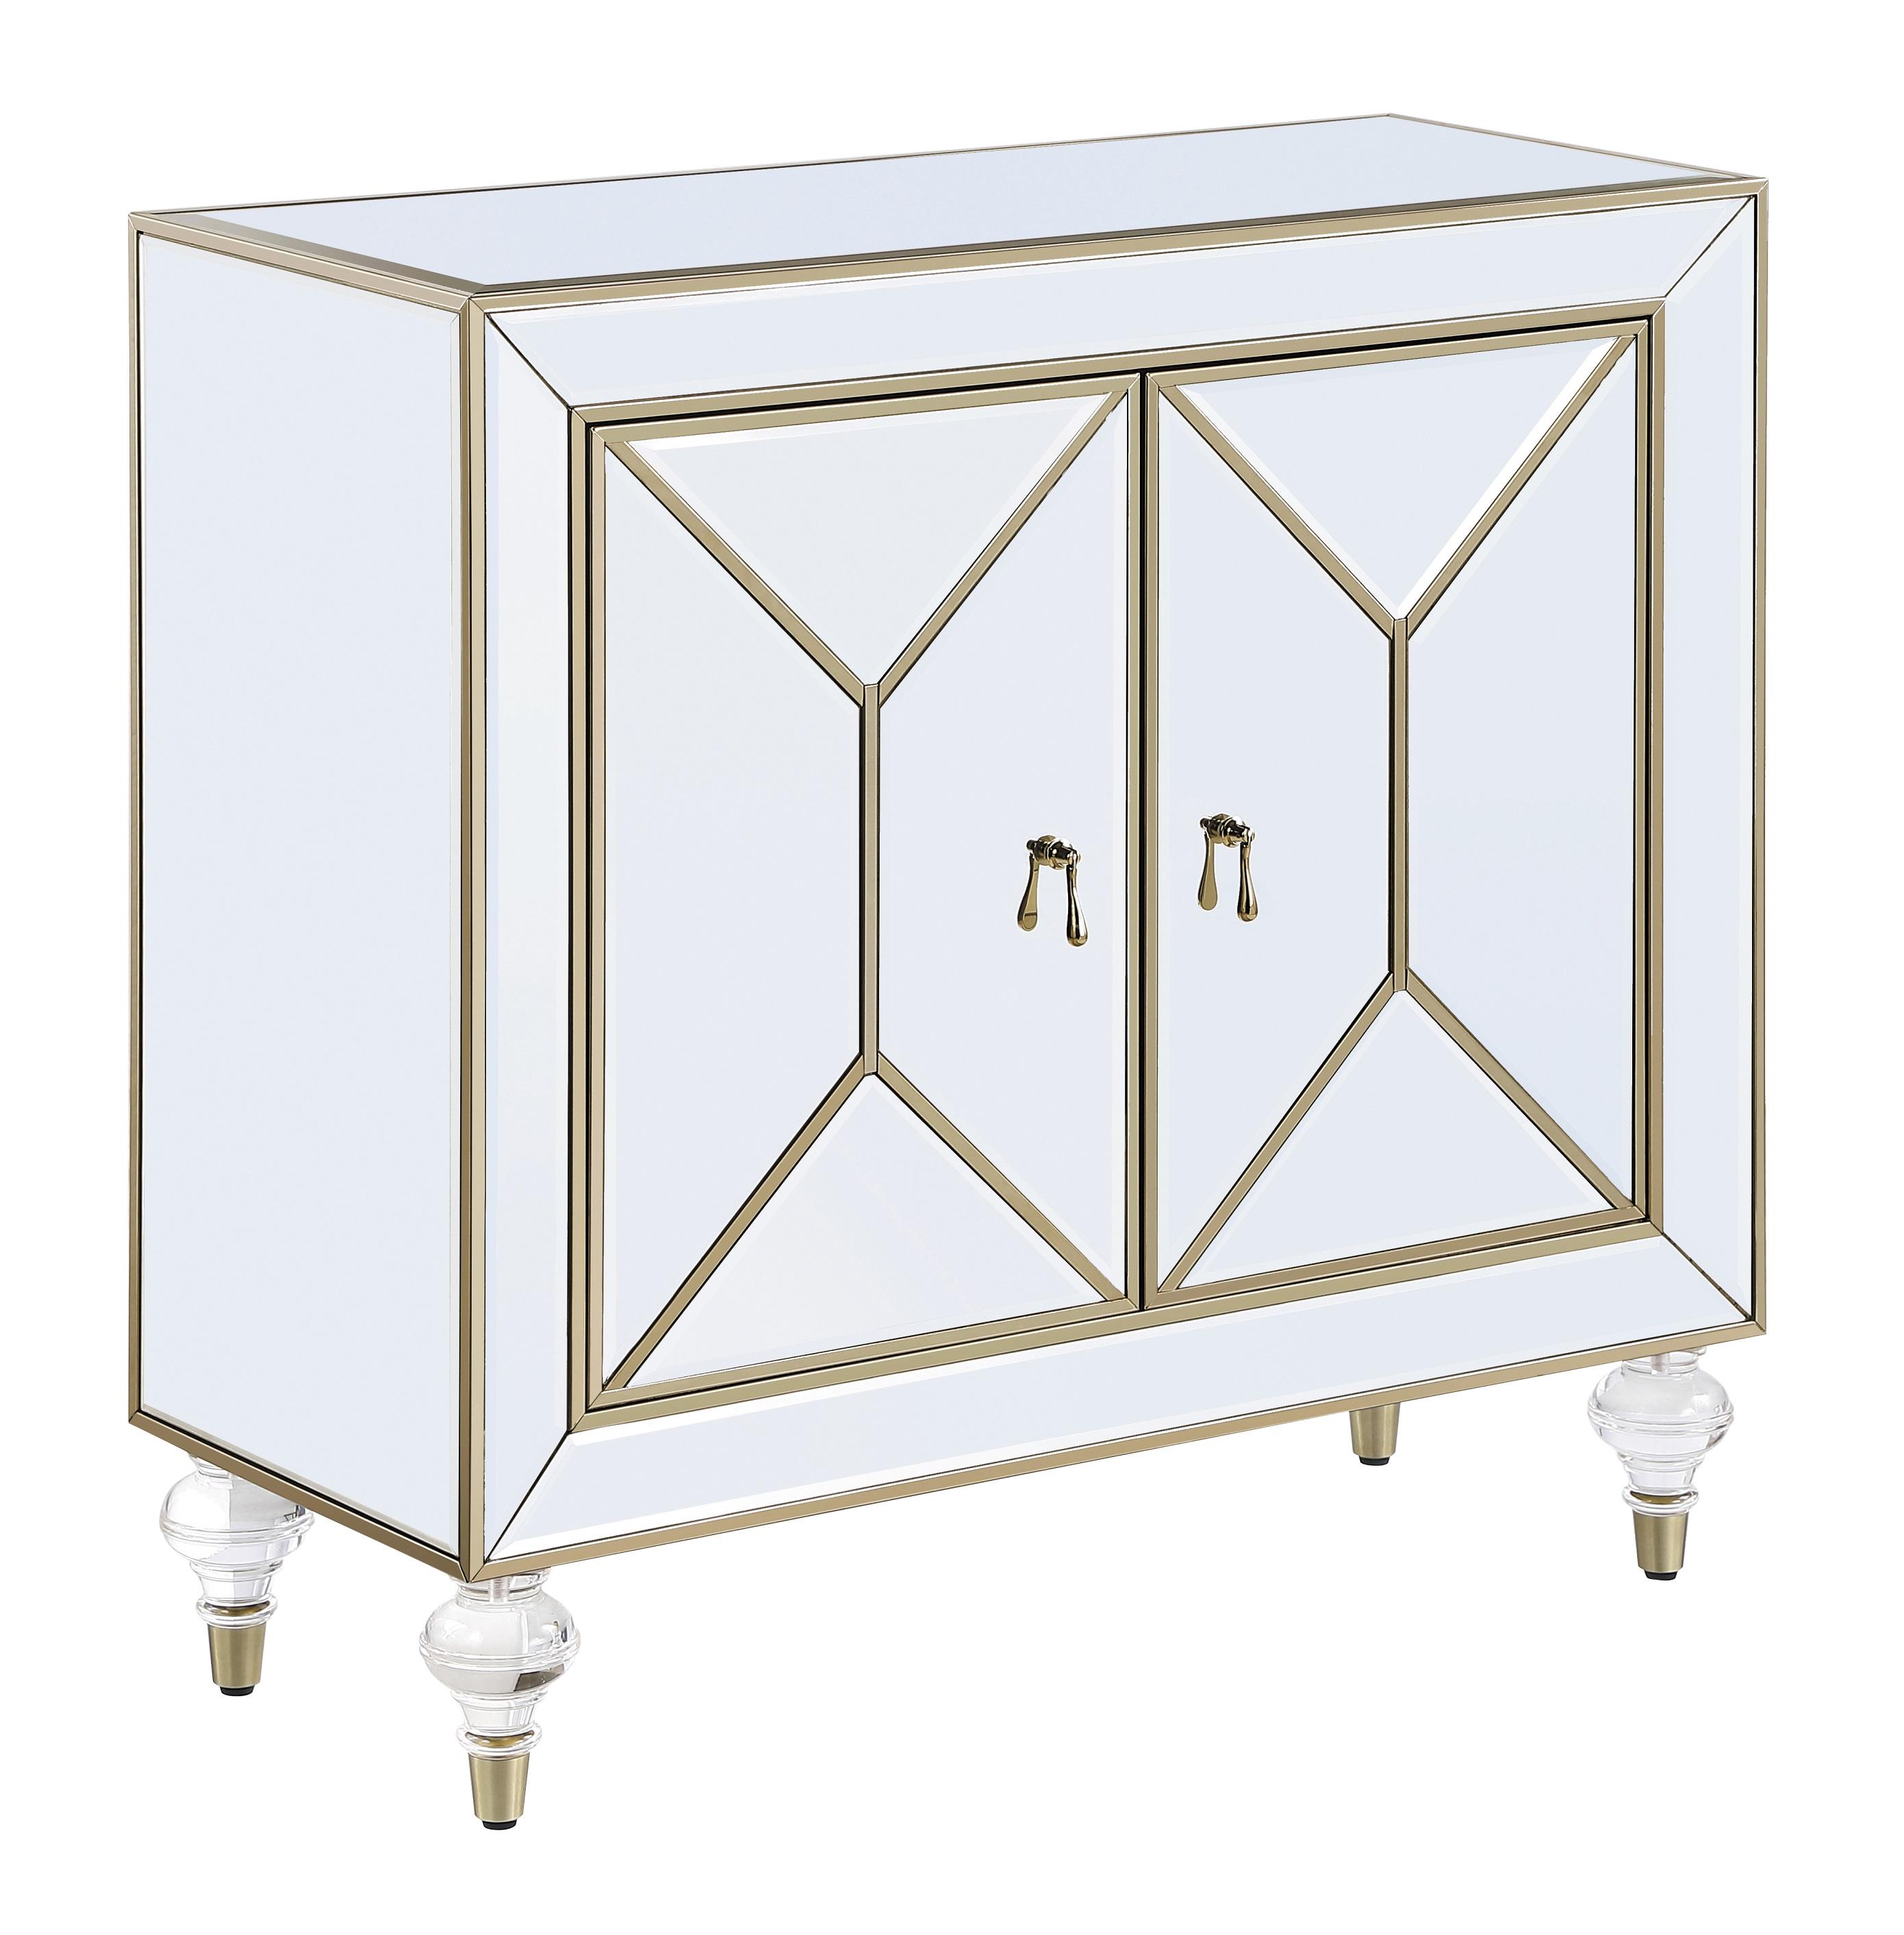 Contemporary Accent Cabinet 951854 951854 in Mirrored, Champagne 